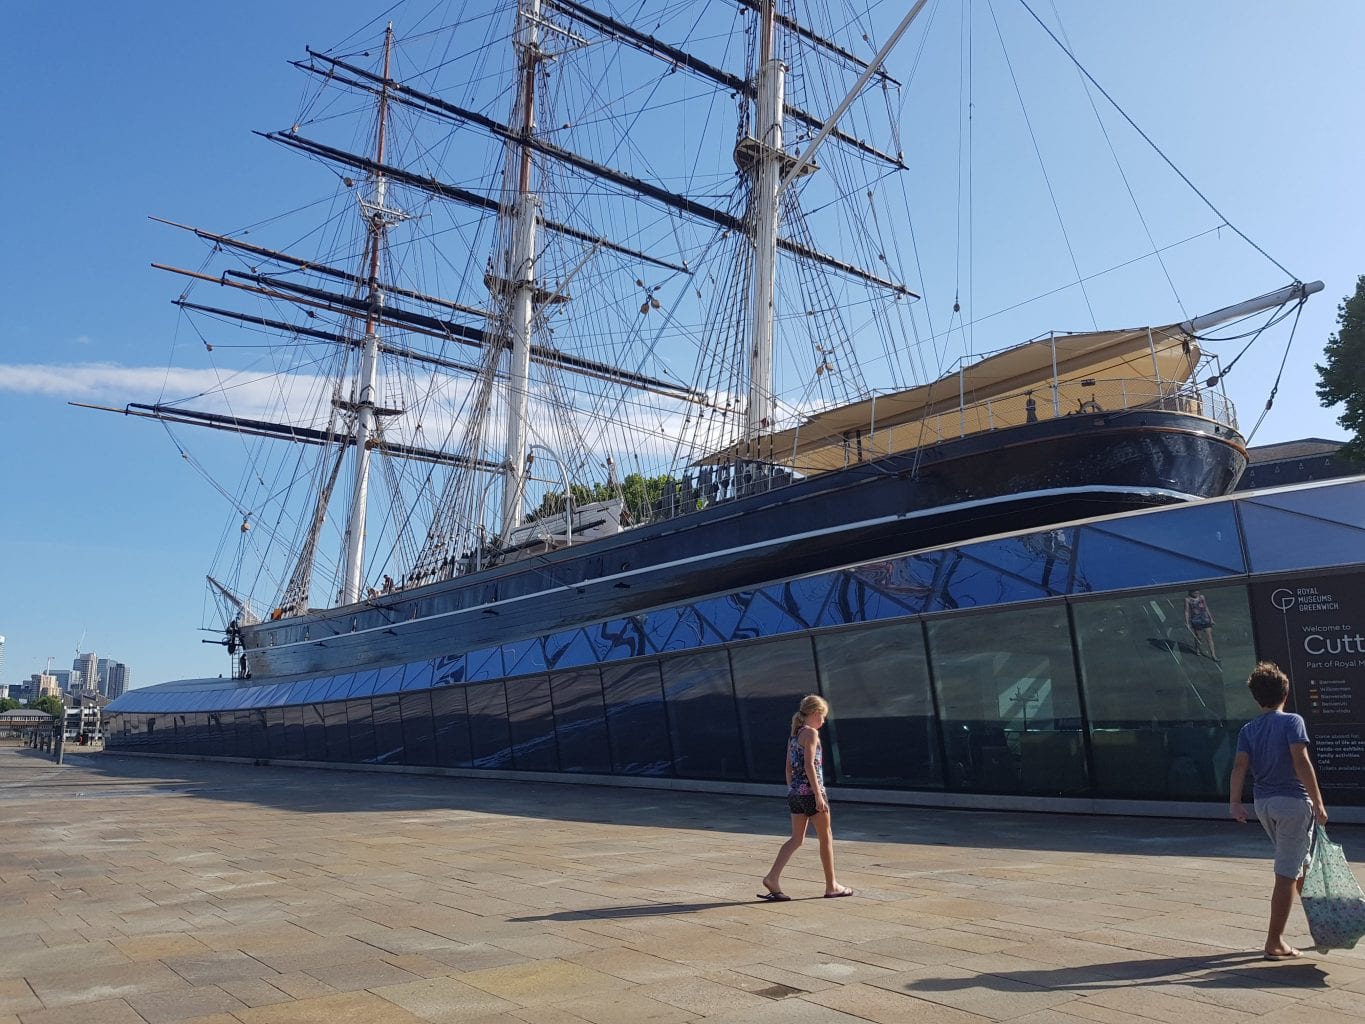 She is gorgeous. The Cutty Sark